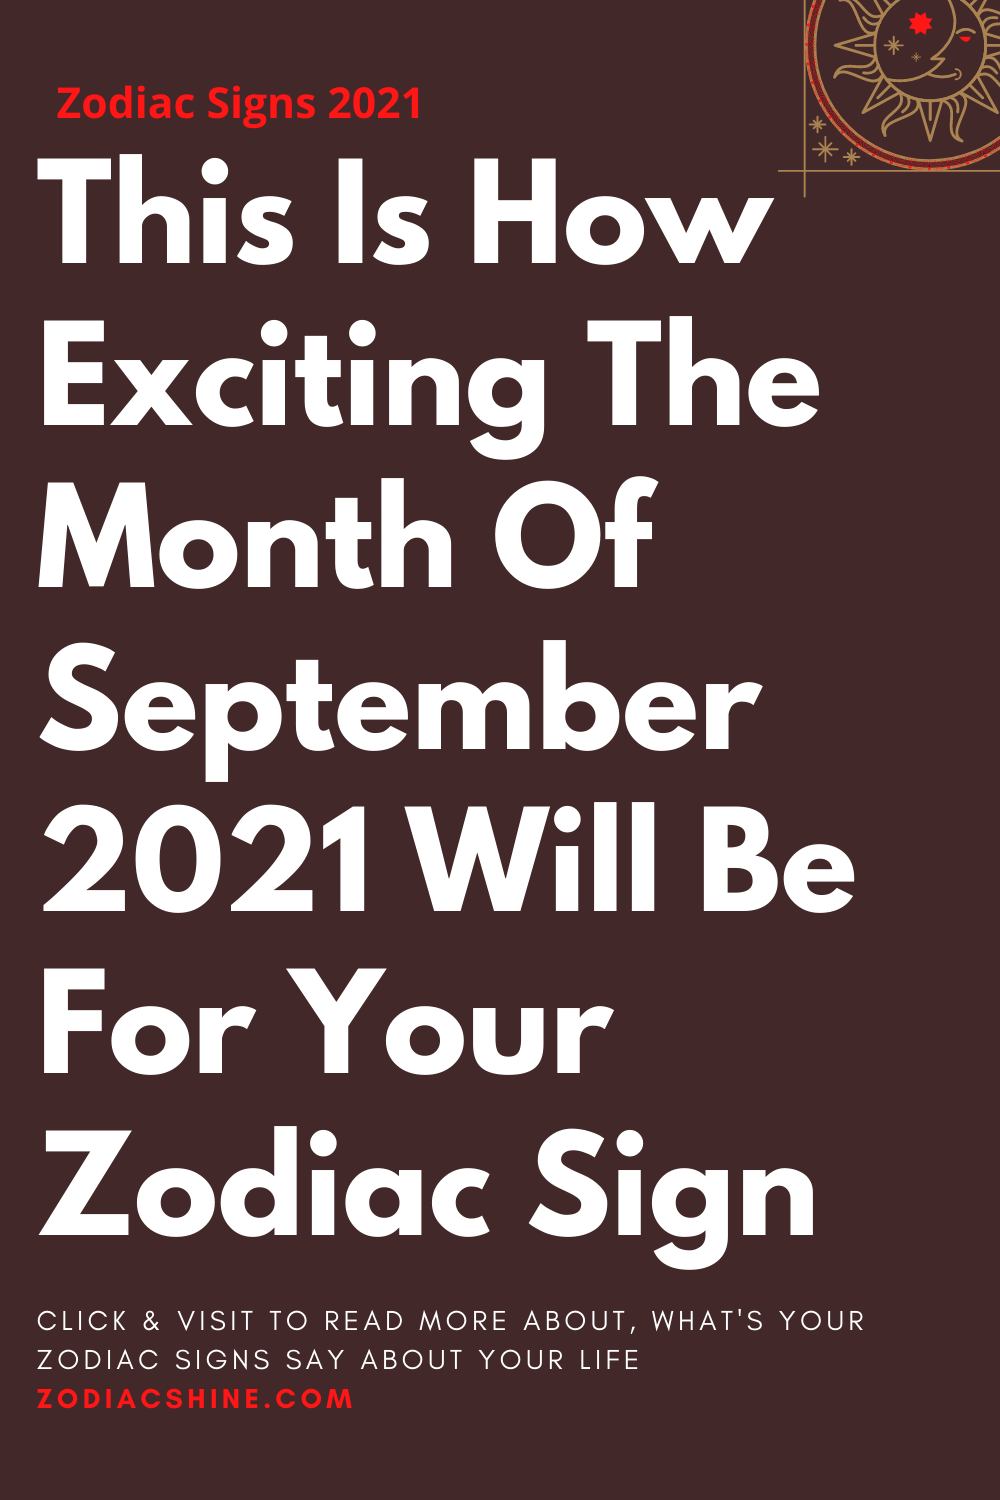 This Is How Exciting The Month Of September 2021 Will Be For Your Zodiac Sign